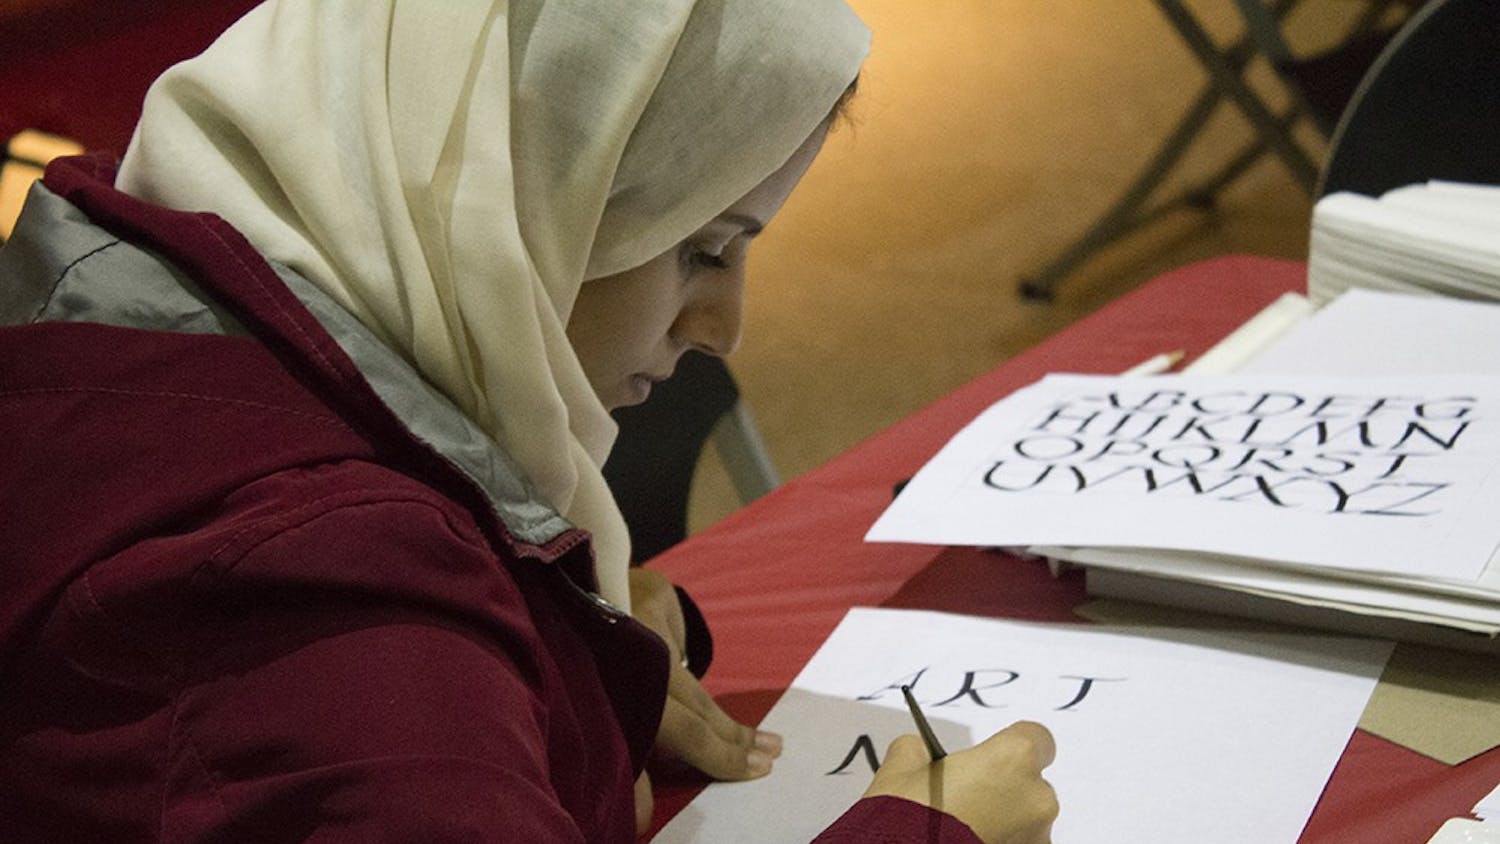 Nouf Kurdi, an Ivy Tech student, volunteers at the calligraphy station of the IU Art Museum's MIX: Pride and Prejudice on Thursday. The event was in conjuction with the IU Department of Theatre and Drama's production of Pride and Prejudice.